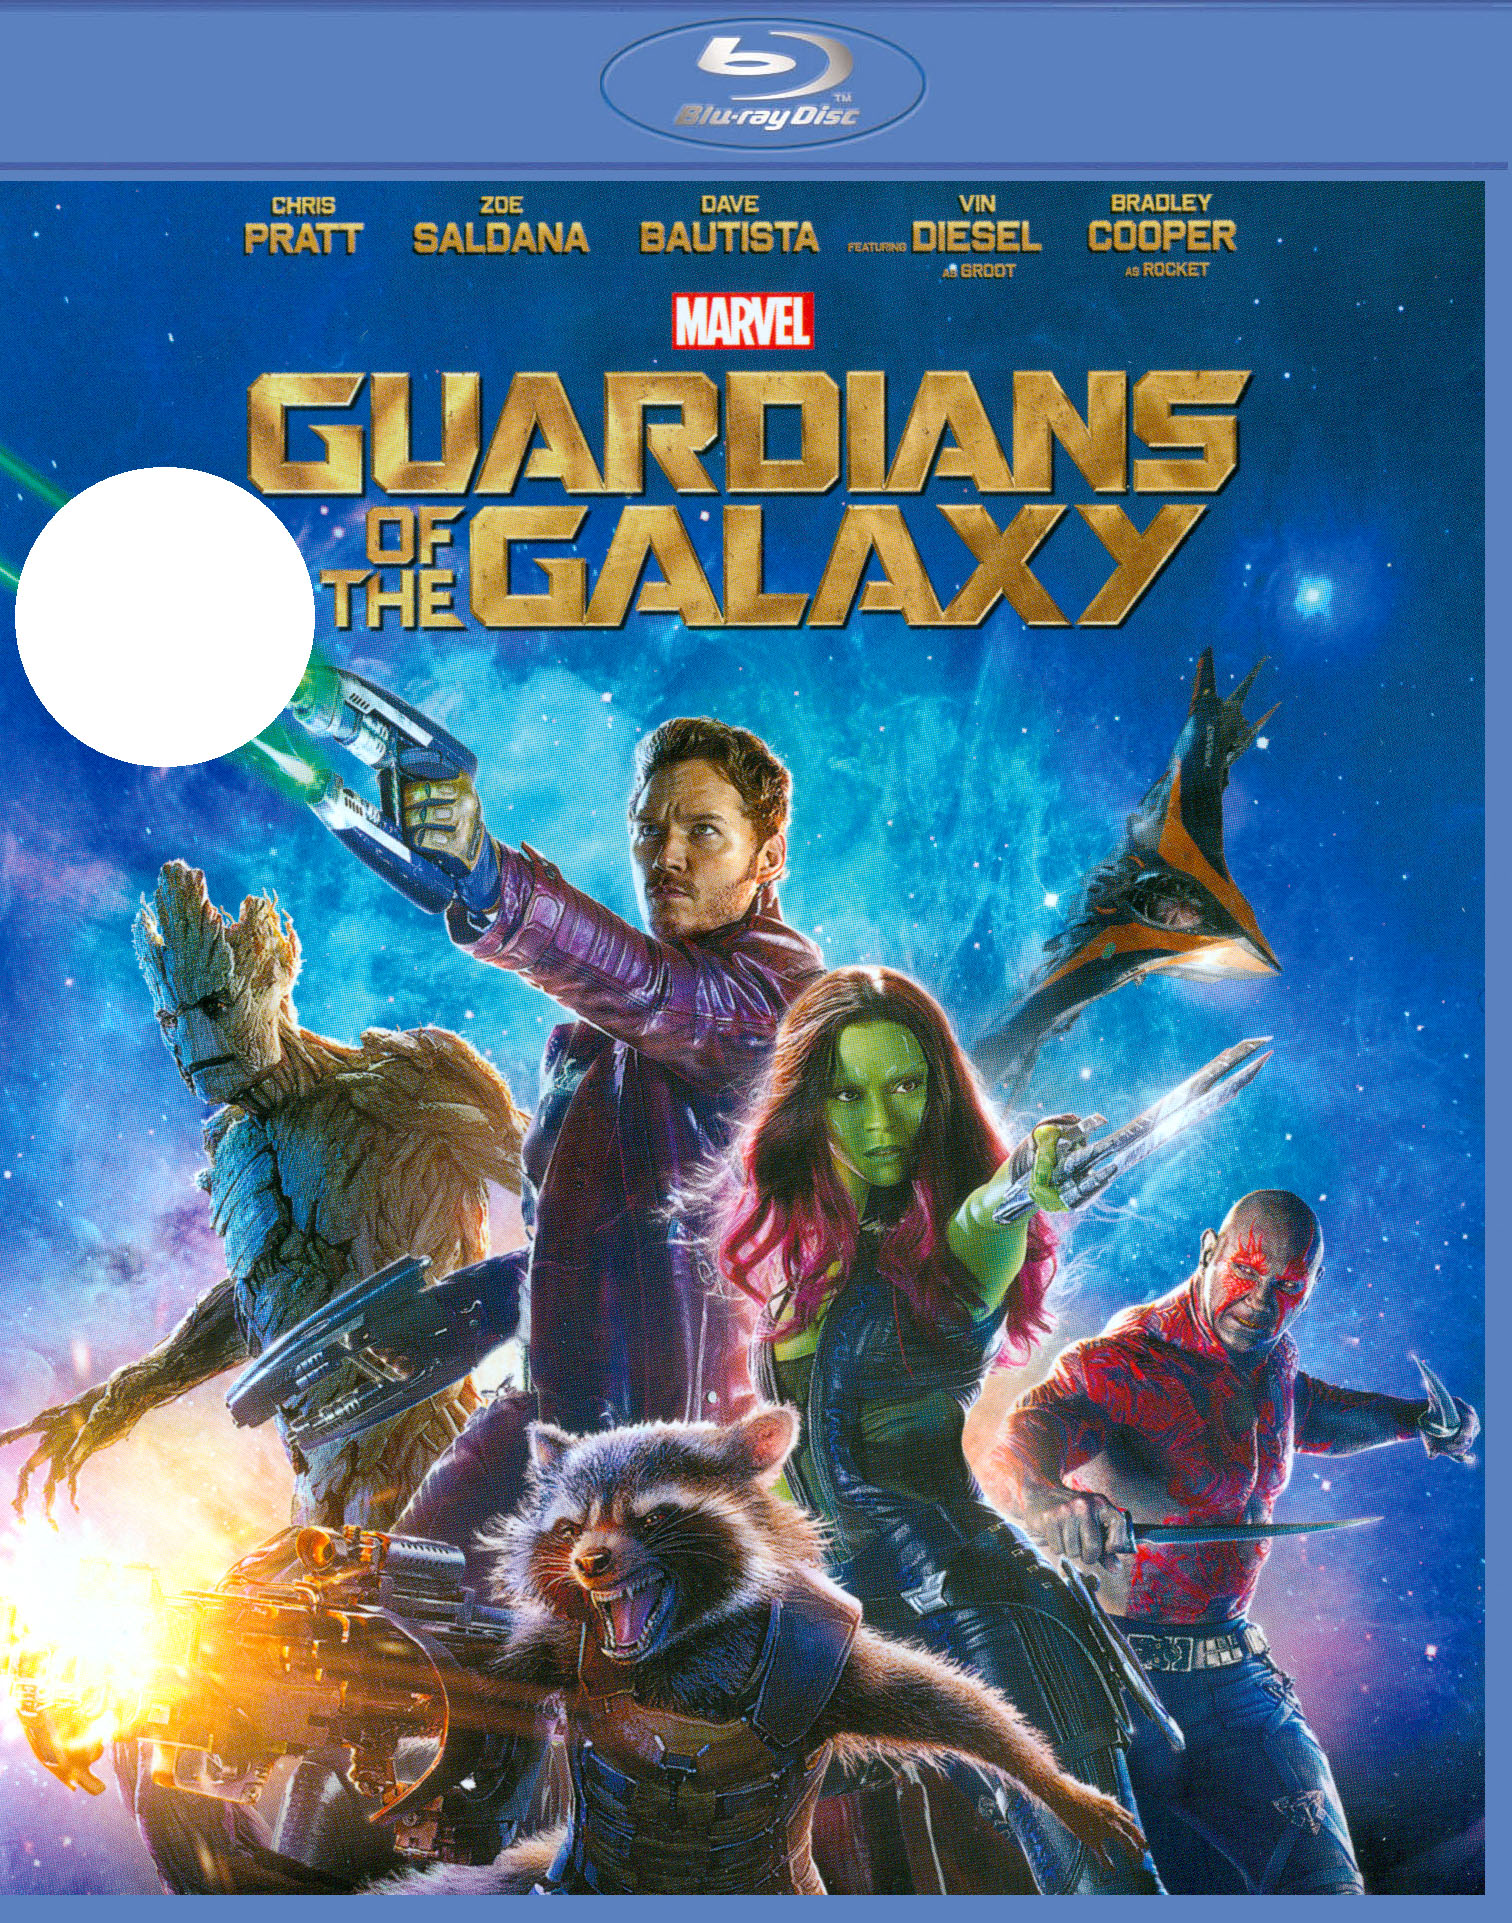 Guardians of the Galaxy (Movie, 2014)